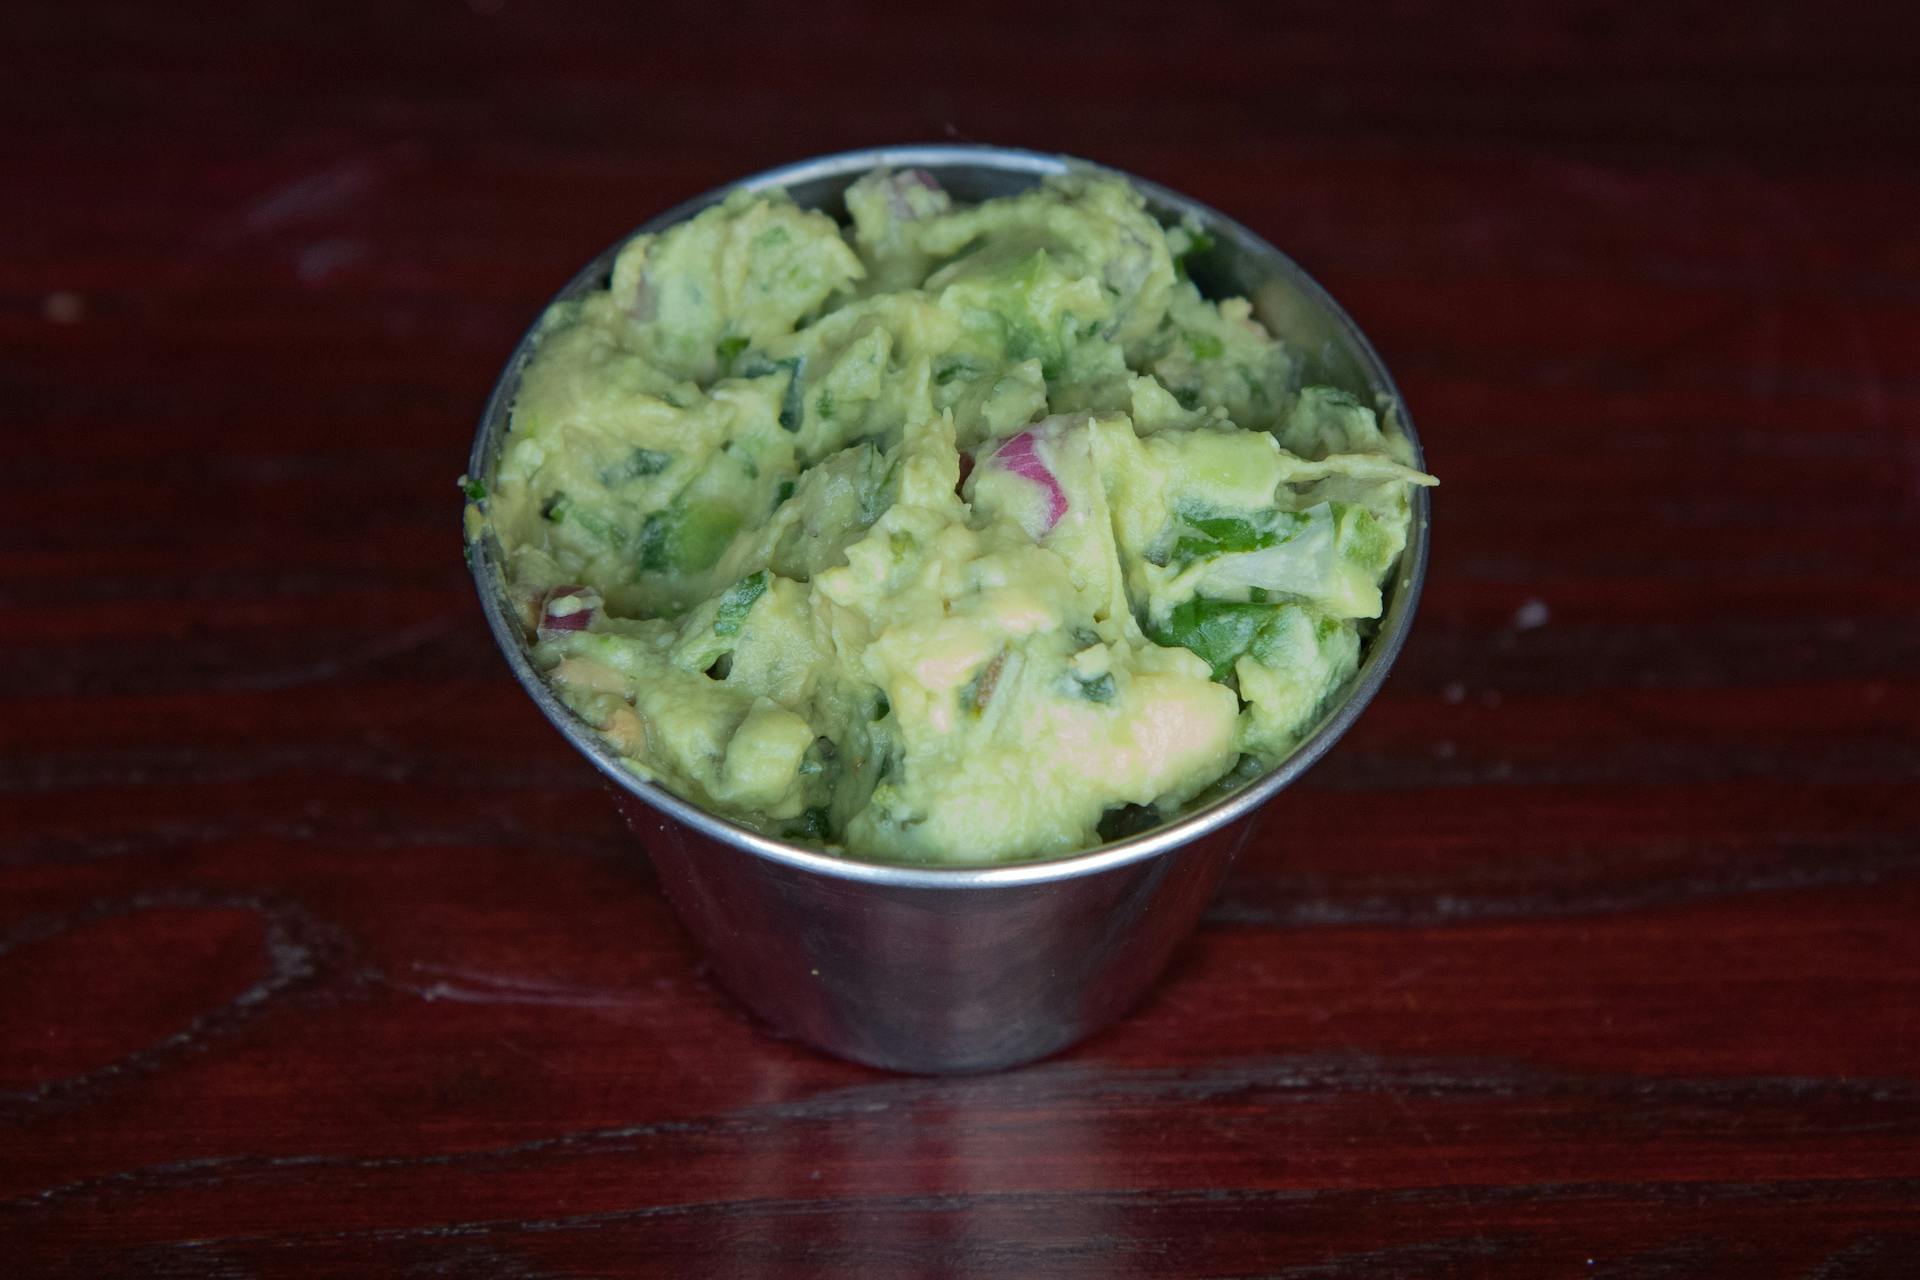 Side of Guacamole from Firehouse Grill - Chicago Ave in Evanston, IL